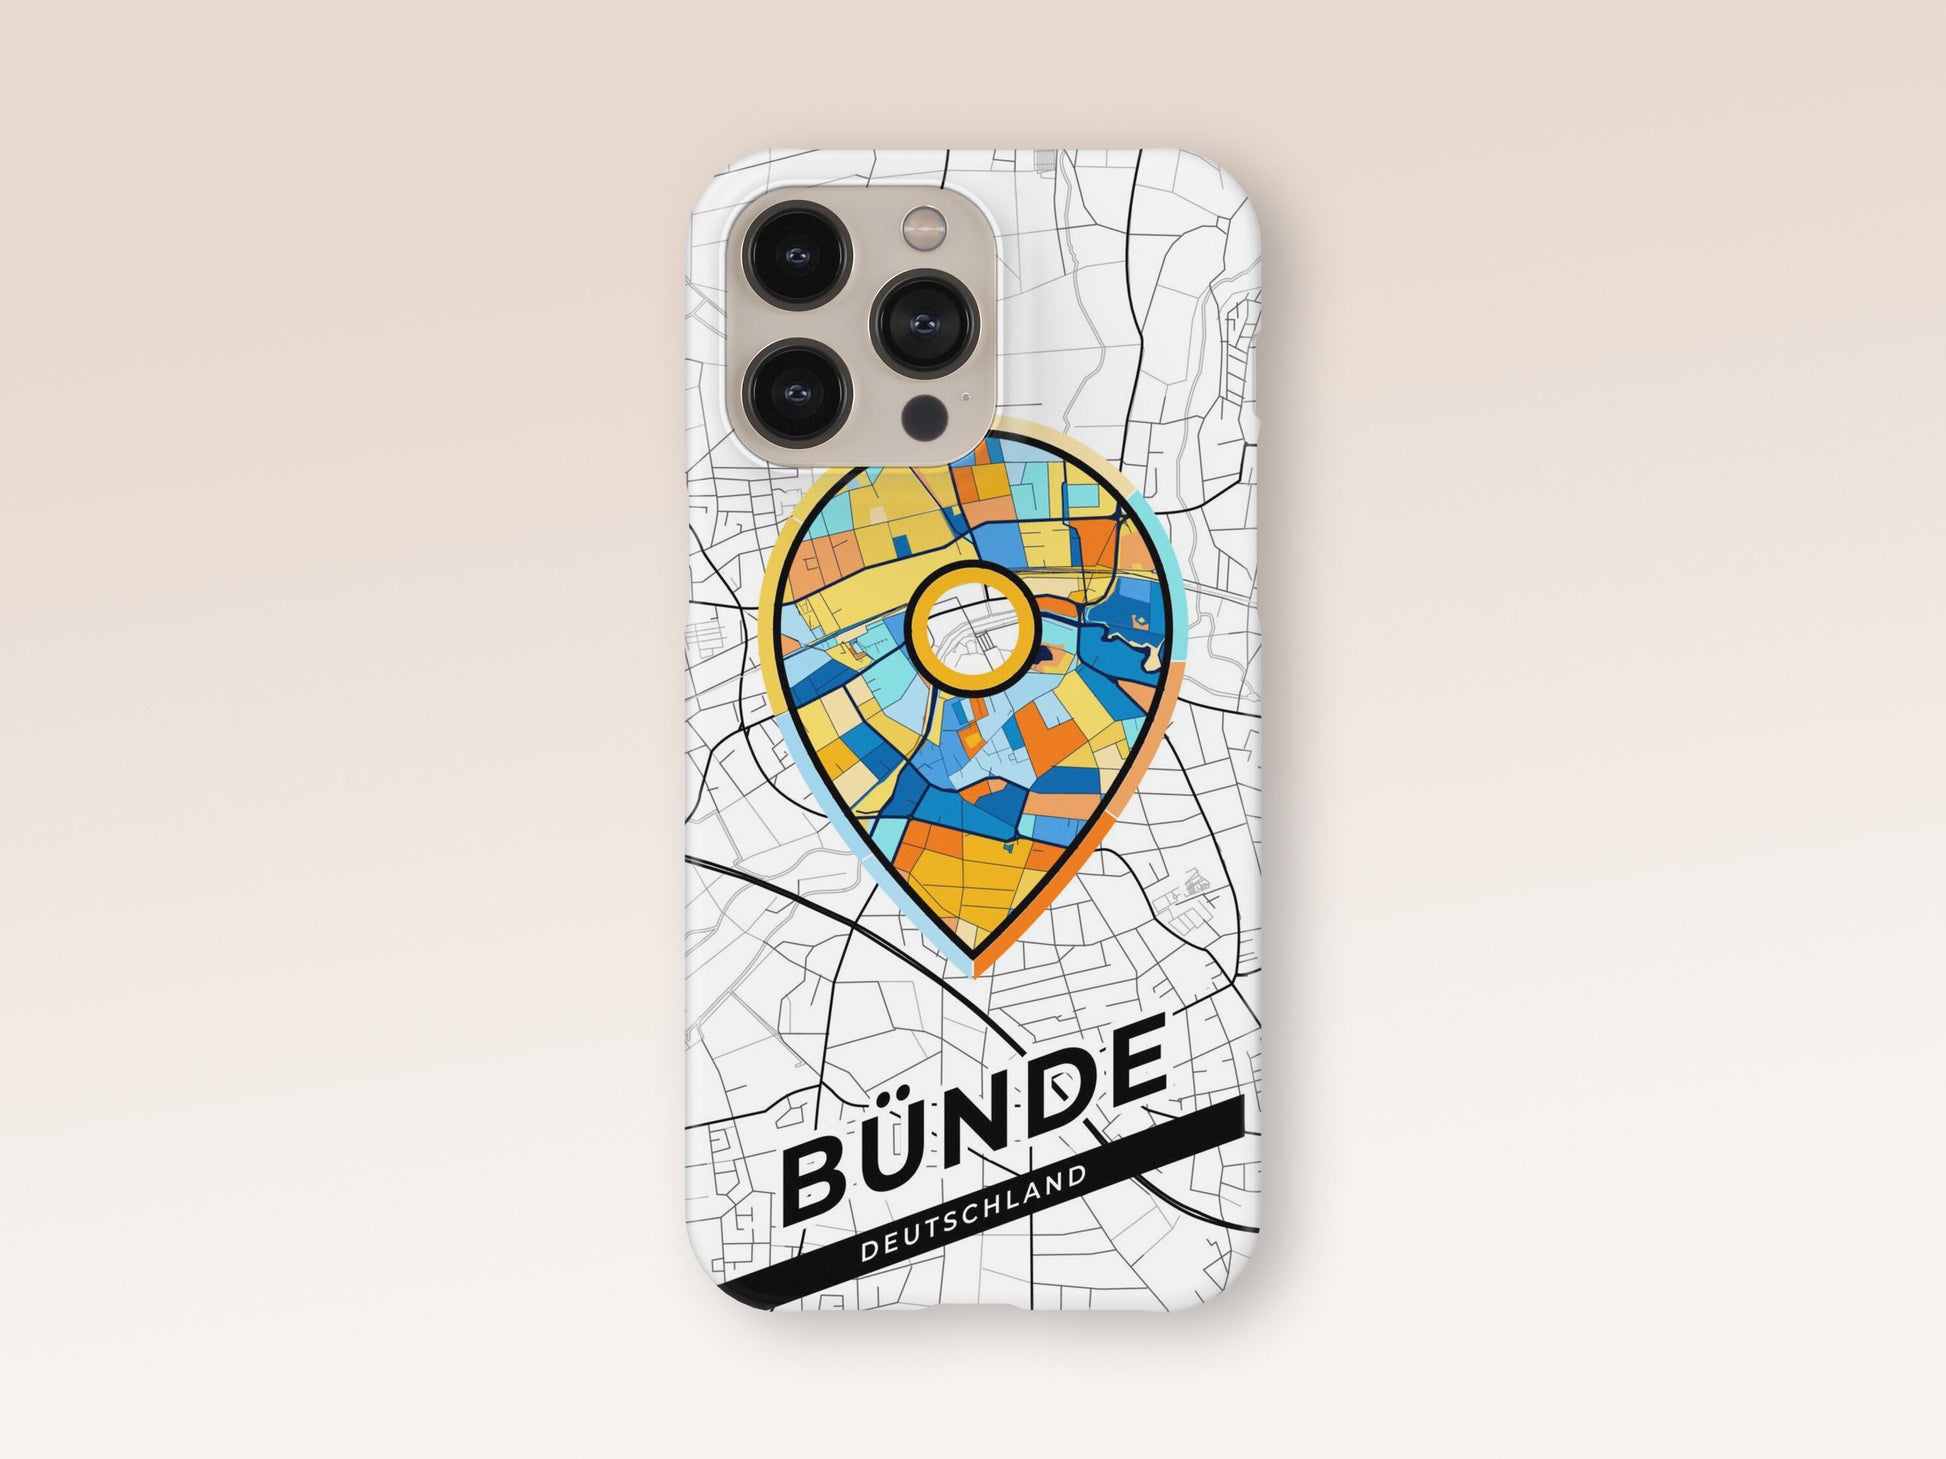 Bünde Deutschland slim phone case with colorful icon. Birthday, wedding or housewarming gift. Couple match cases. 1